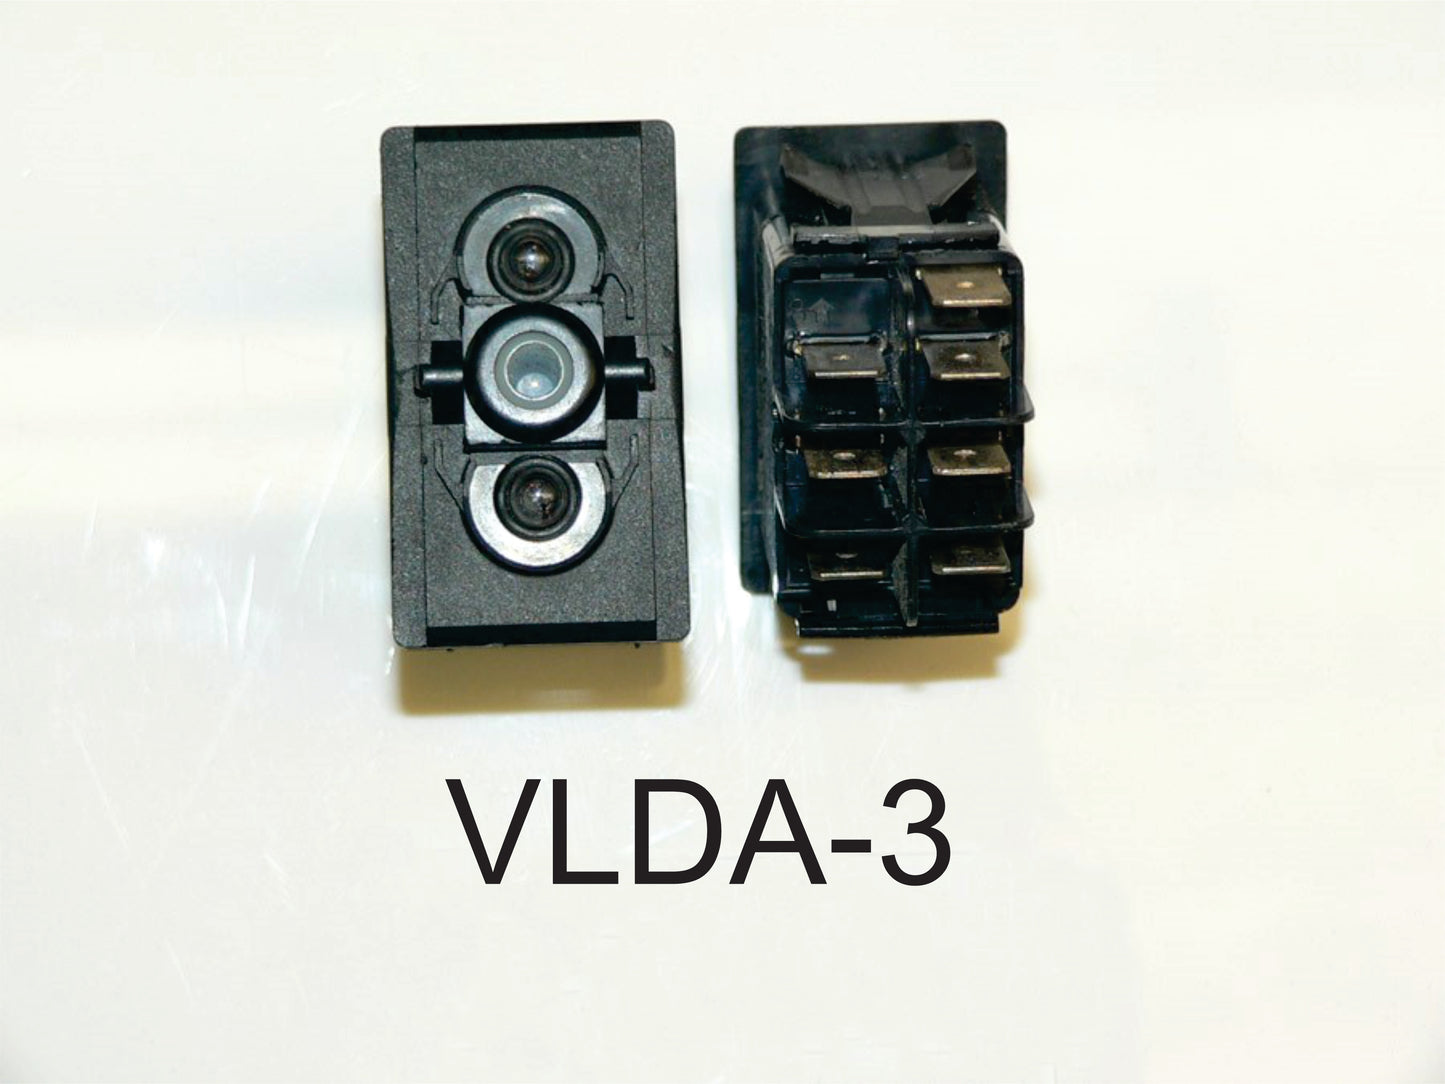 VLDA-3 Carling (ON)/OFF/(ON) double pole momentary rocker switch,  clear lamps in position #1&2.